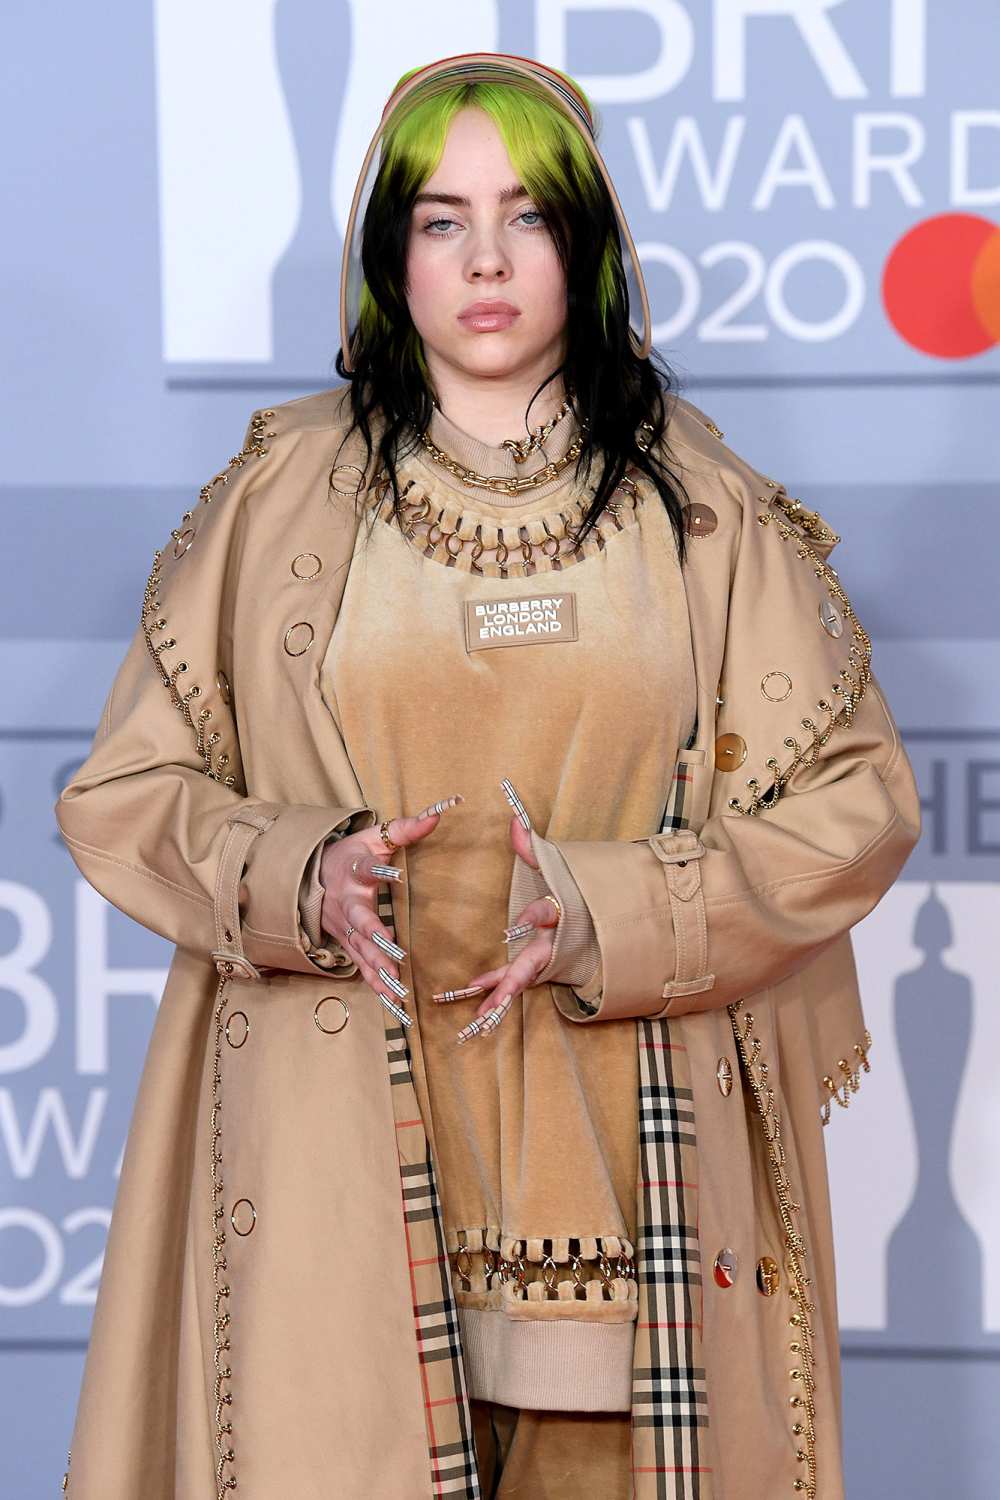 Billie Eilish Gets Real About Her 2 Month Battle With COVID-19 If I Weren't Vaccinated I Would Have Died